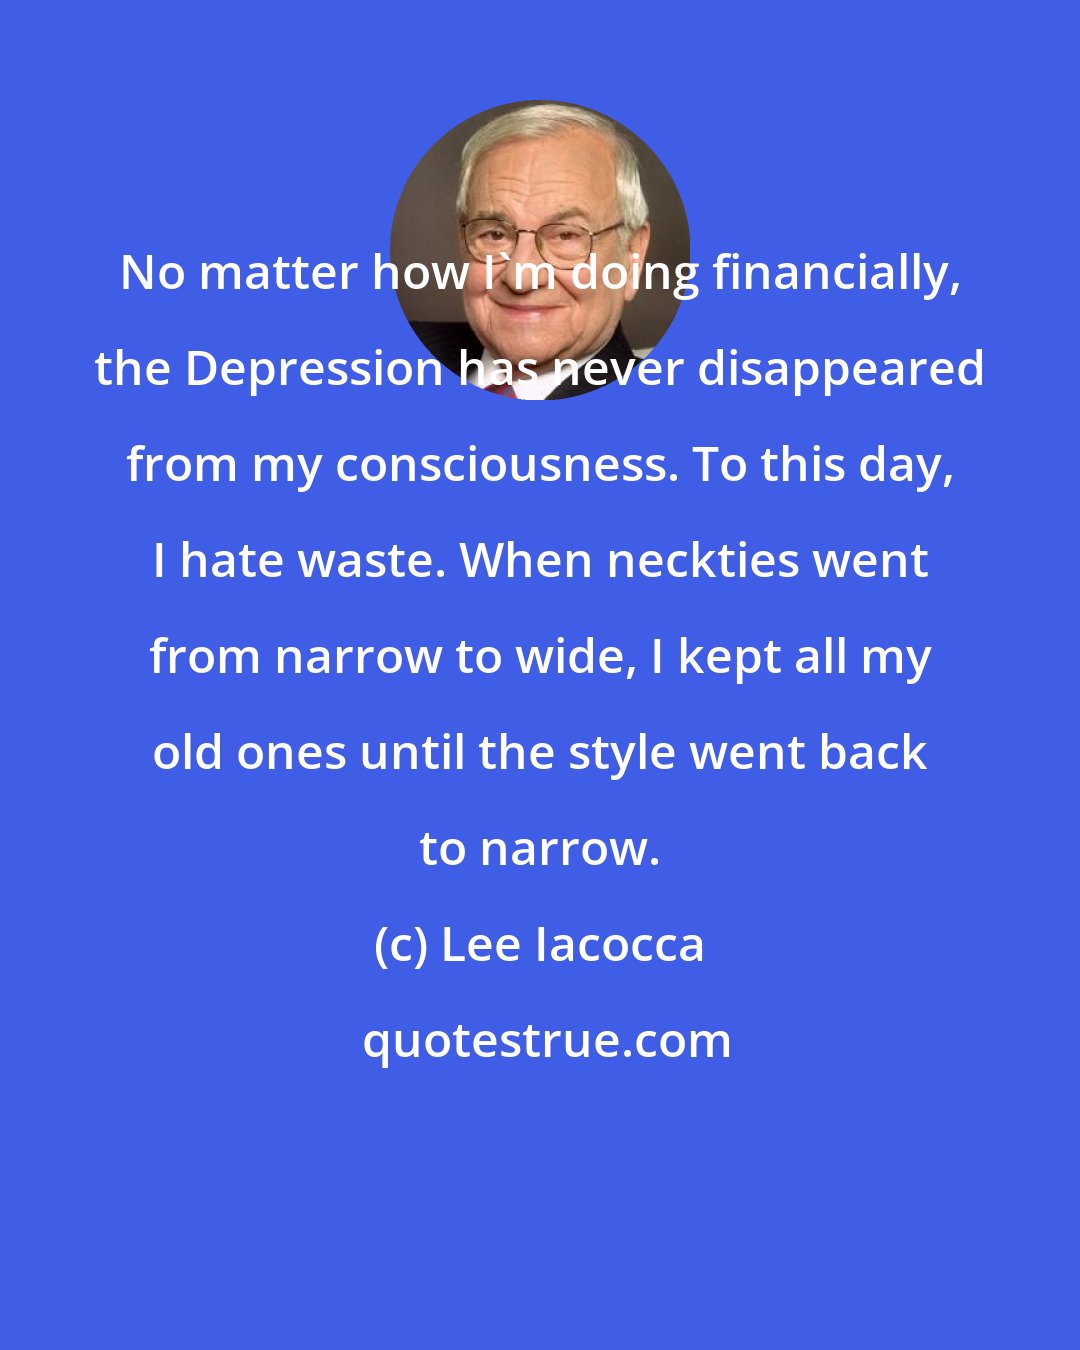 Lee Iacocca: No matter how I'm doing financially, the Depression has never disappeared from my consciousness. To this day, I hate waste. When neckties went from narrow to wide, I kept all my old ones until the style went back to narrow.